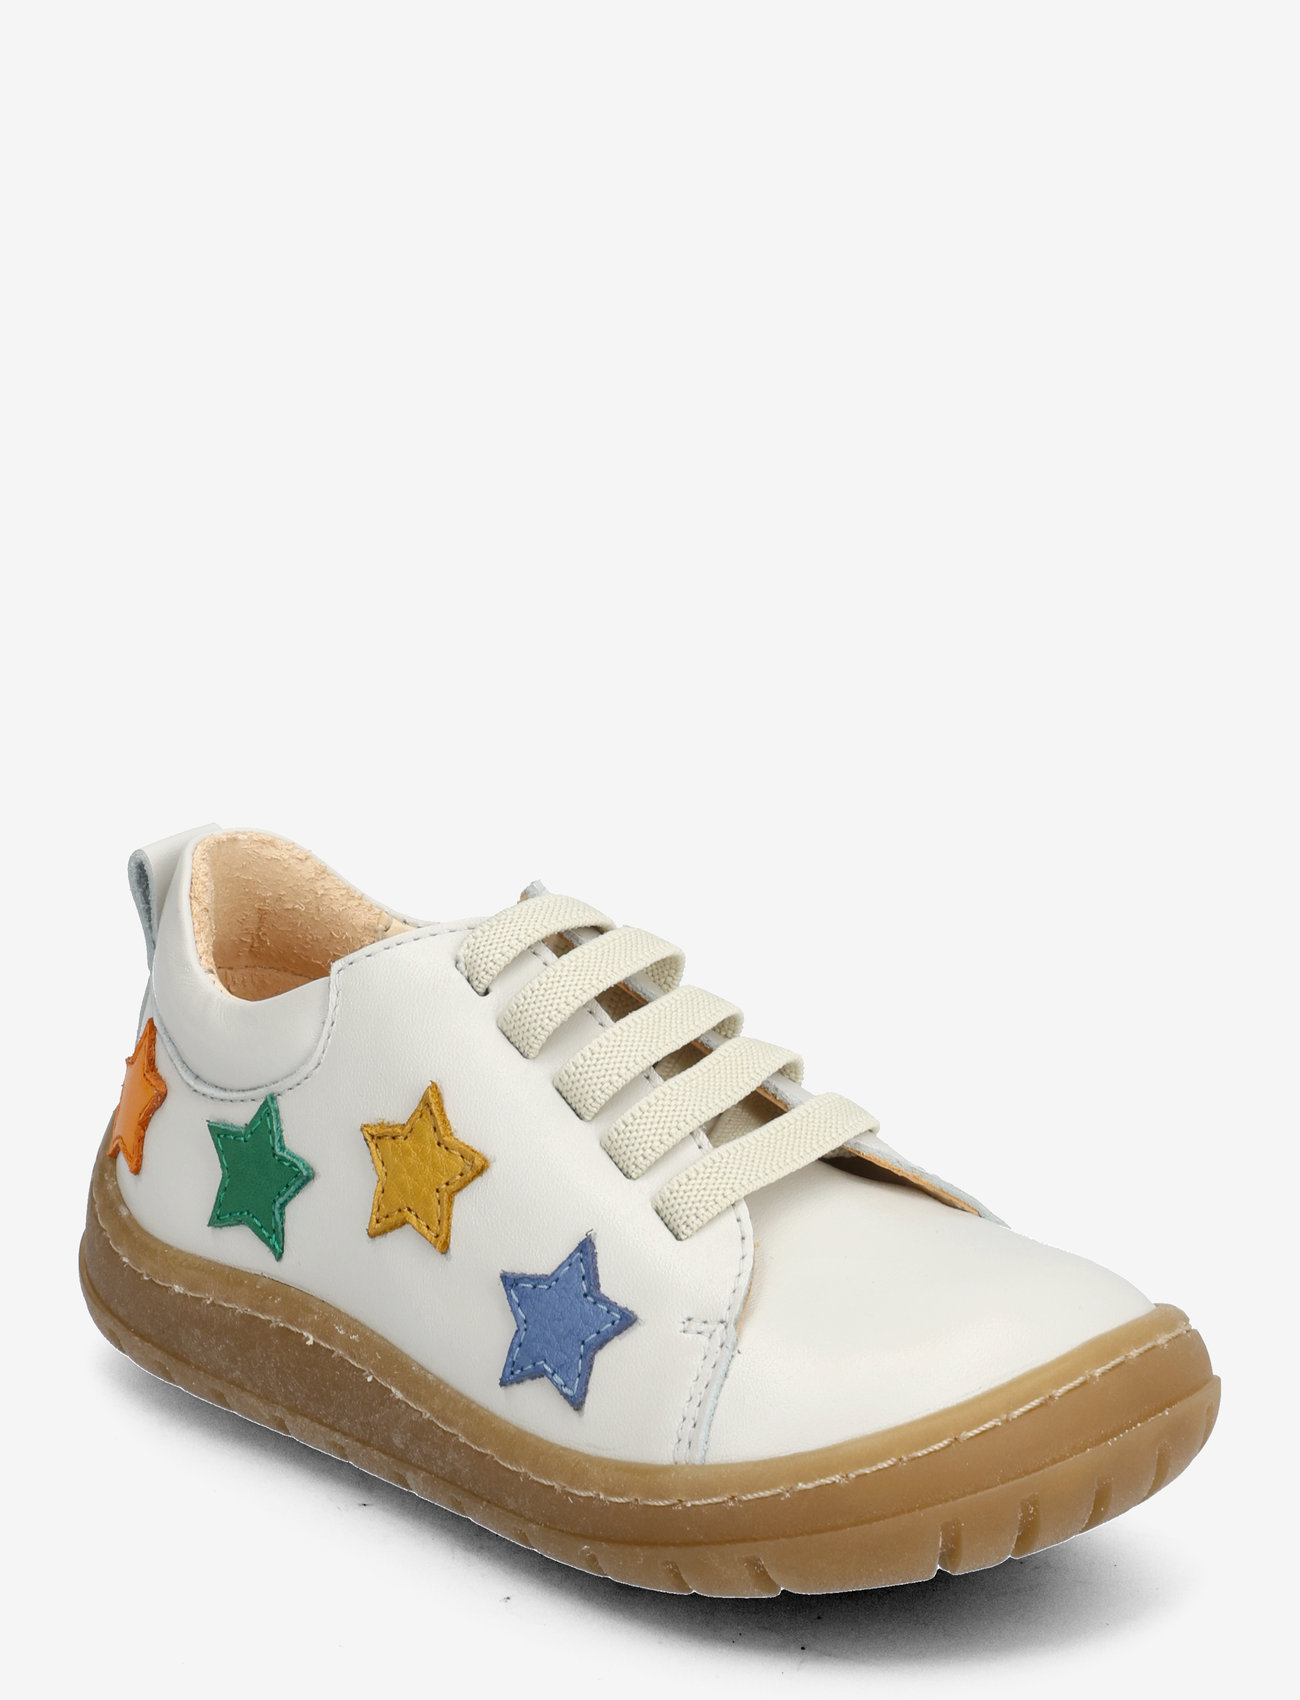 ANGULUS - Shoes - flat - with lace - vasaros pasiūlymai - 1493/a006 off white/stars - 0